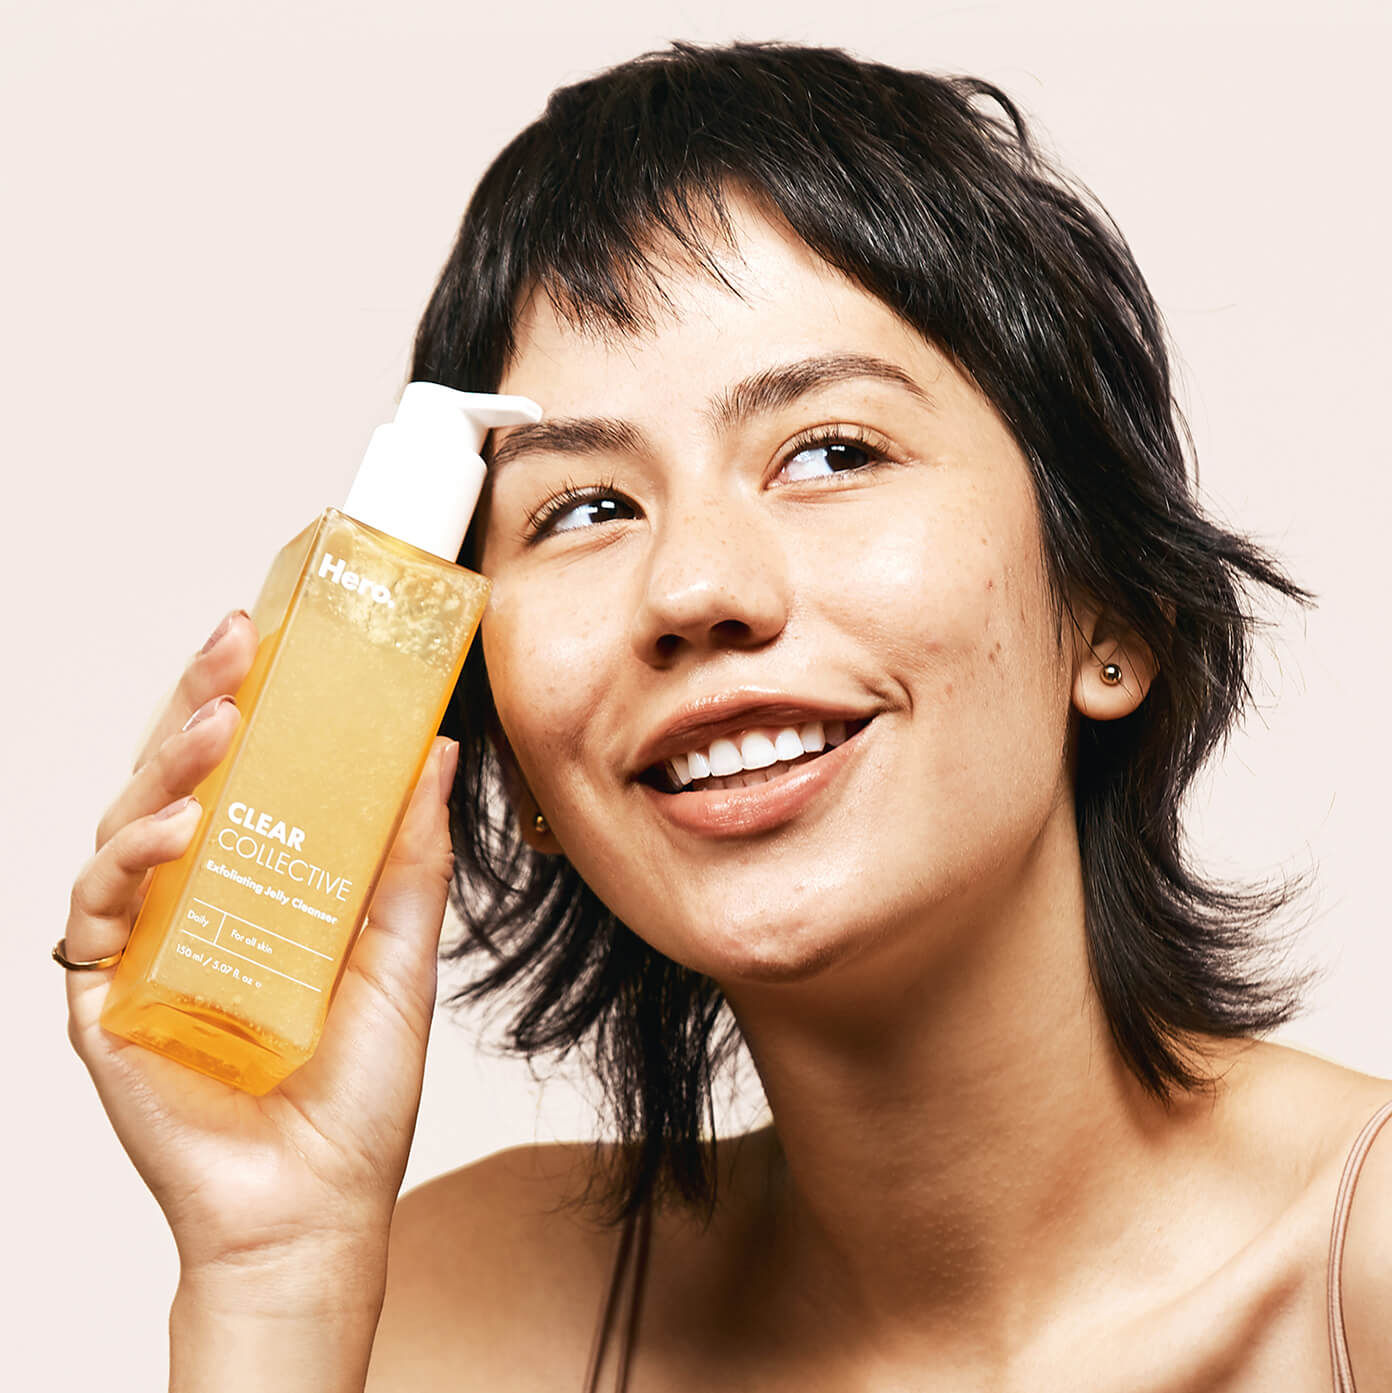 Model holding Clear Collective Exfoliating Jelly Cleanser 